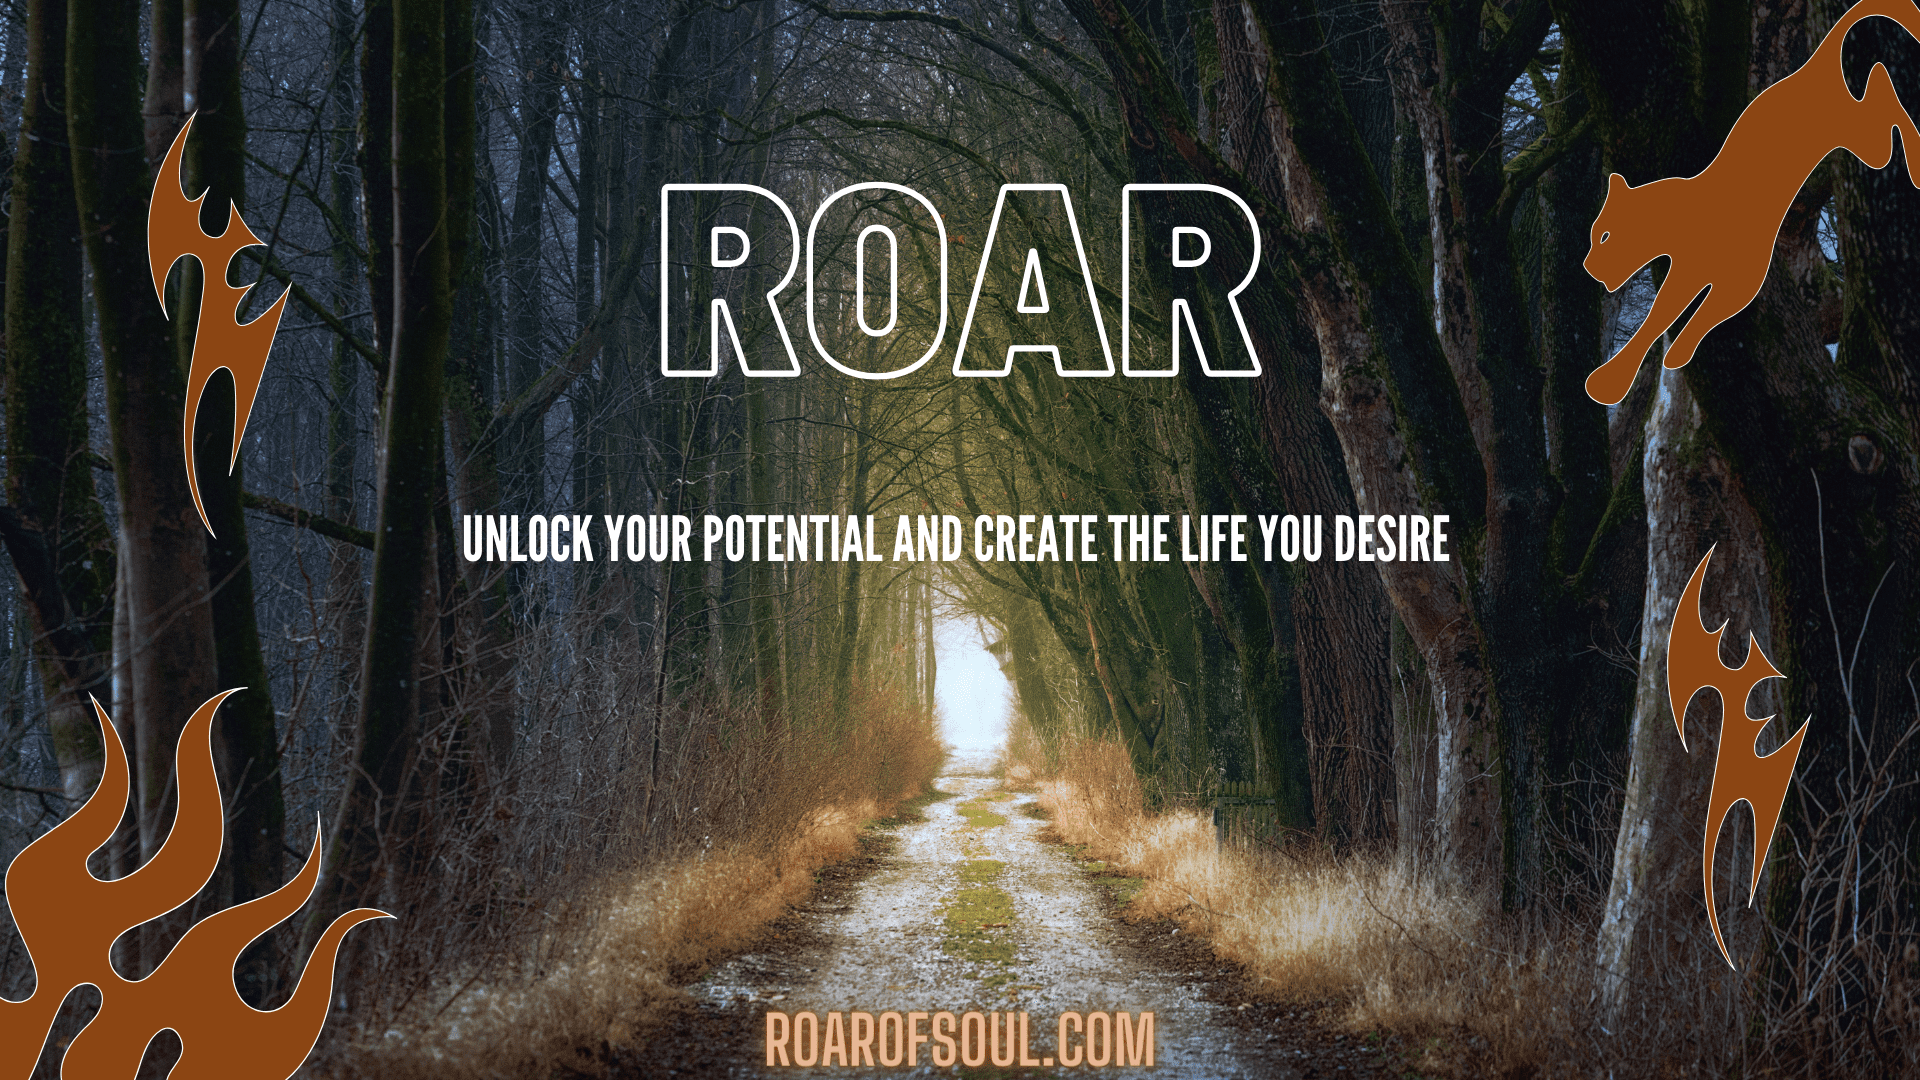 Unlock your potential with roarofsoul.com